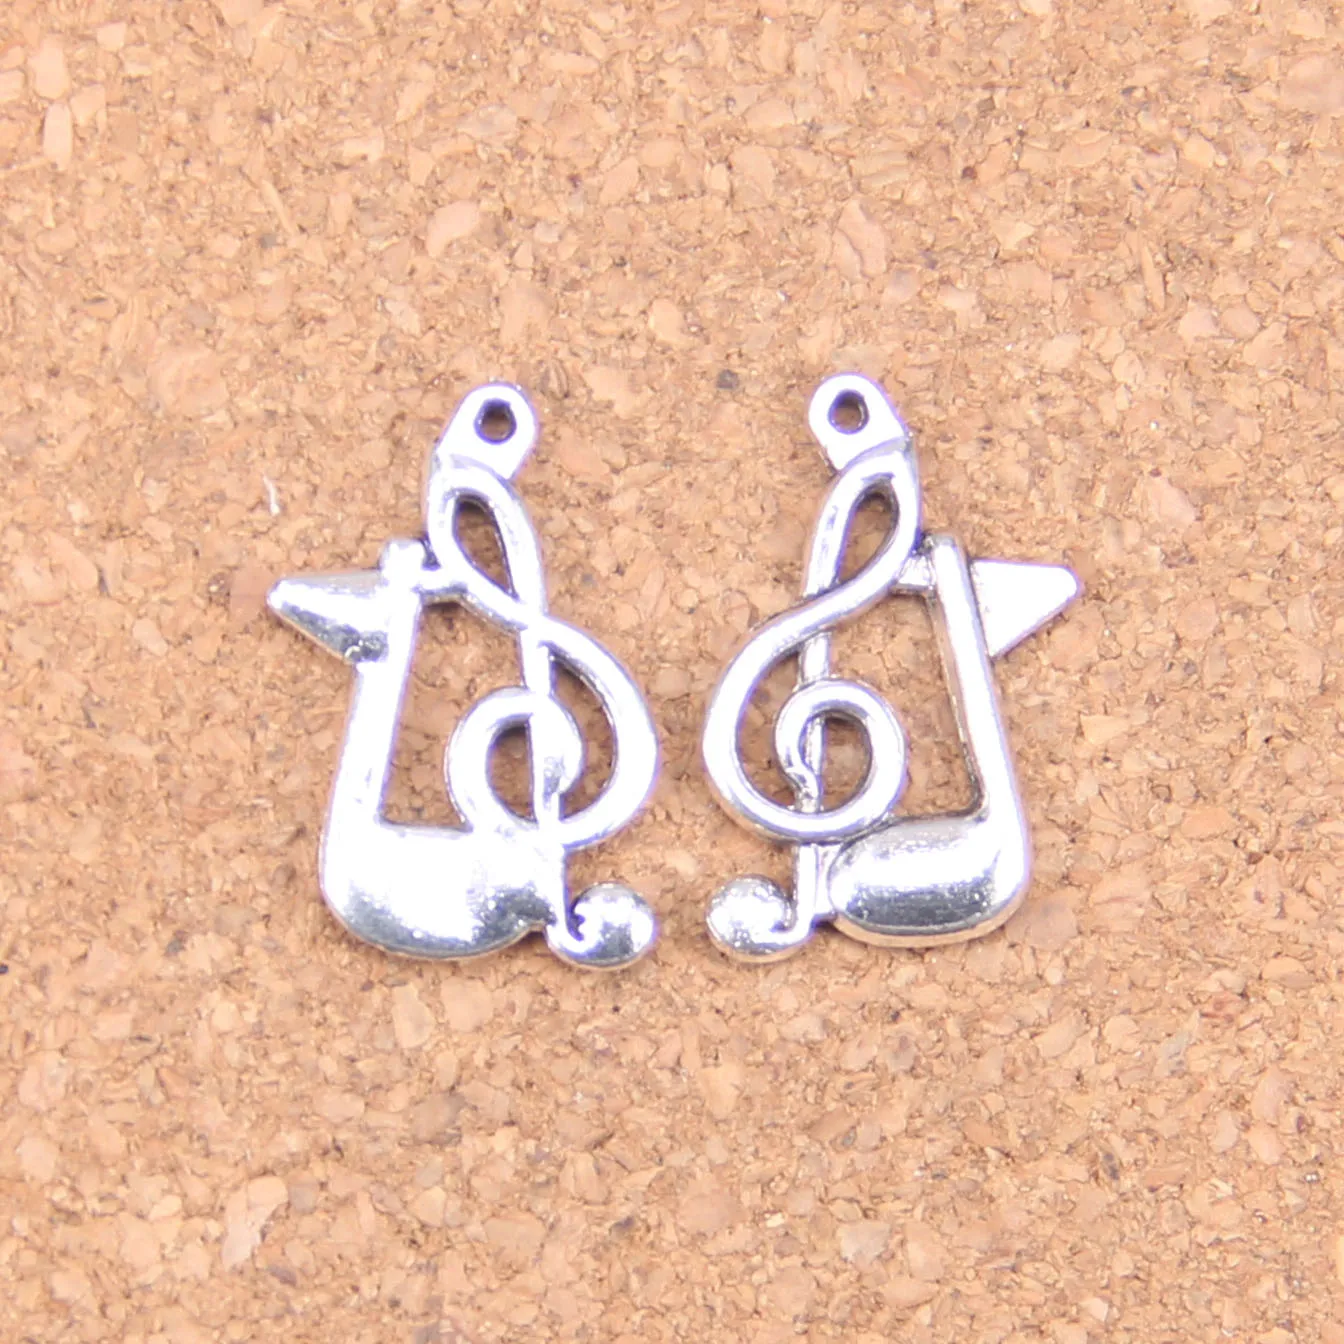 109st Antik Silver Bronze Plated Musical Note Charms Pendant DIY Halsband Armband Bangle Fynd 21 * 13mm